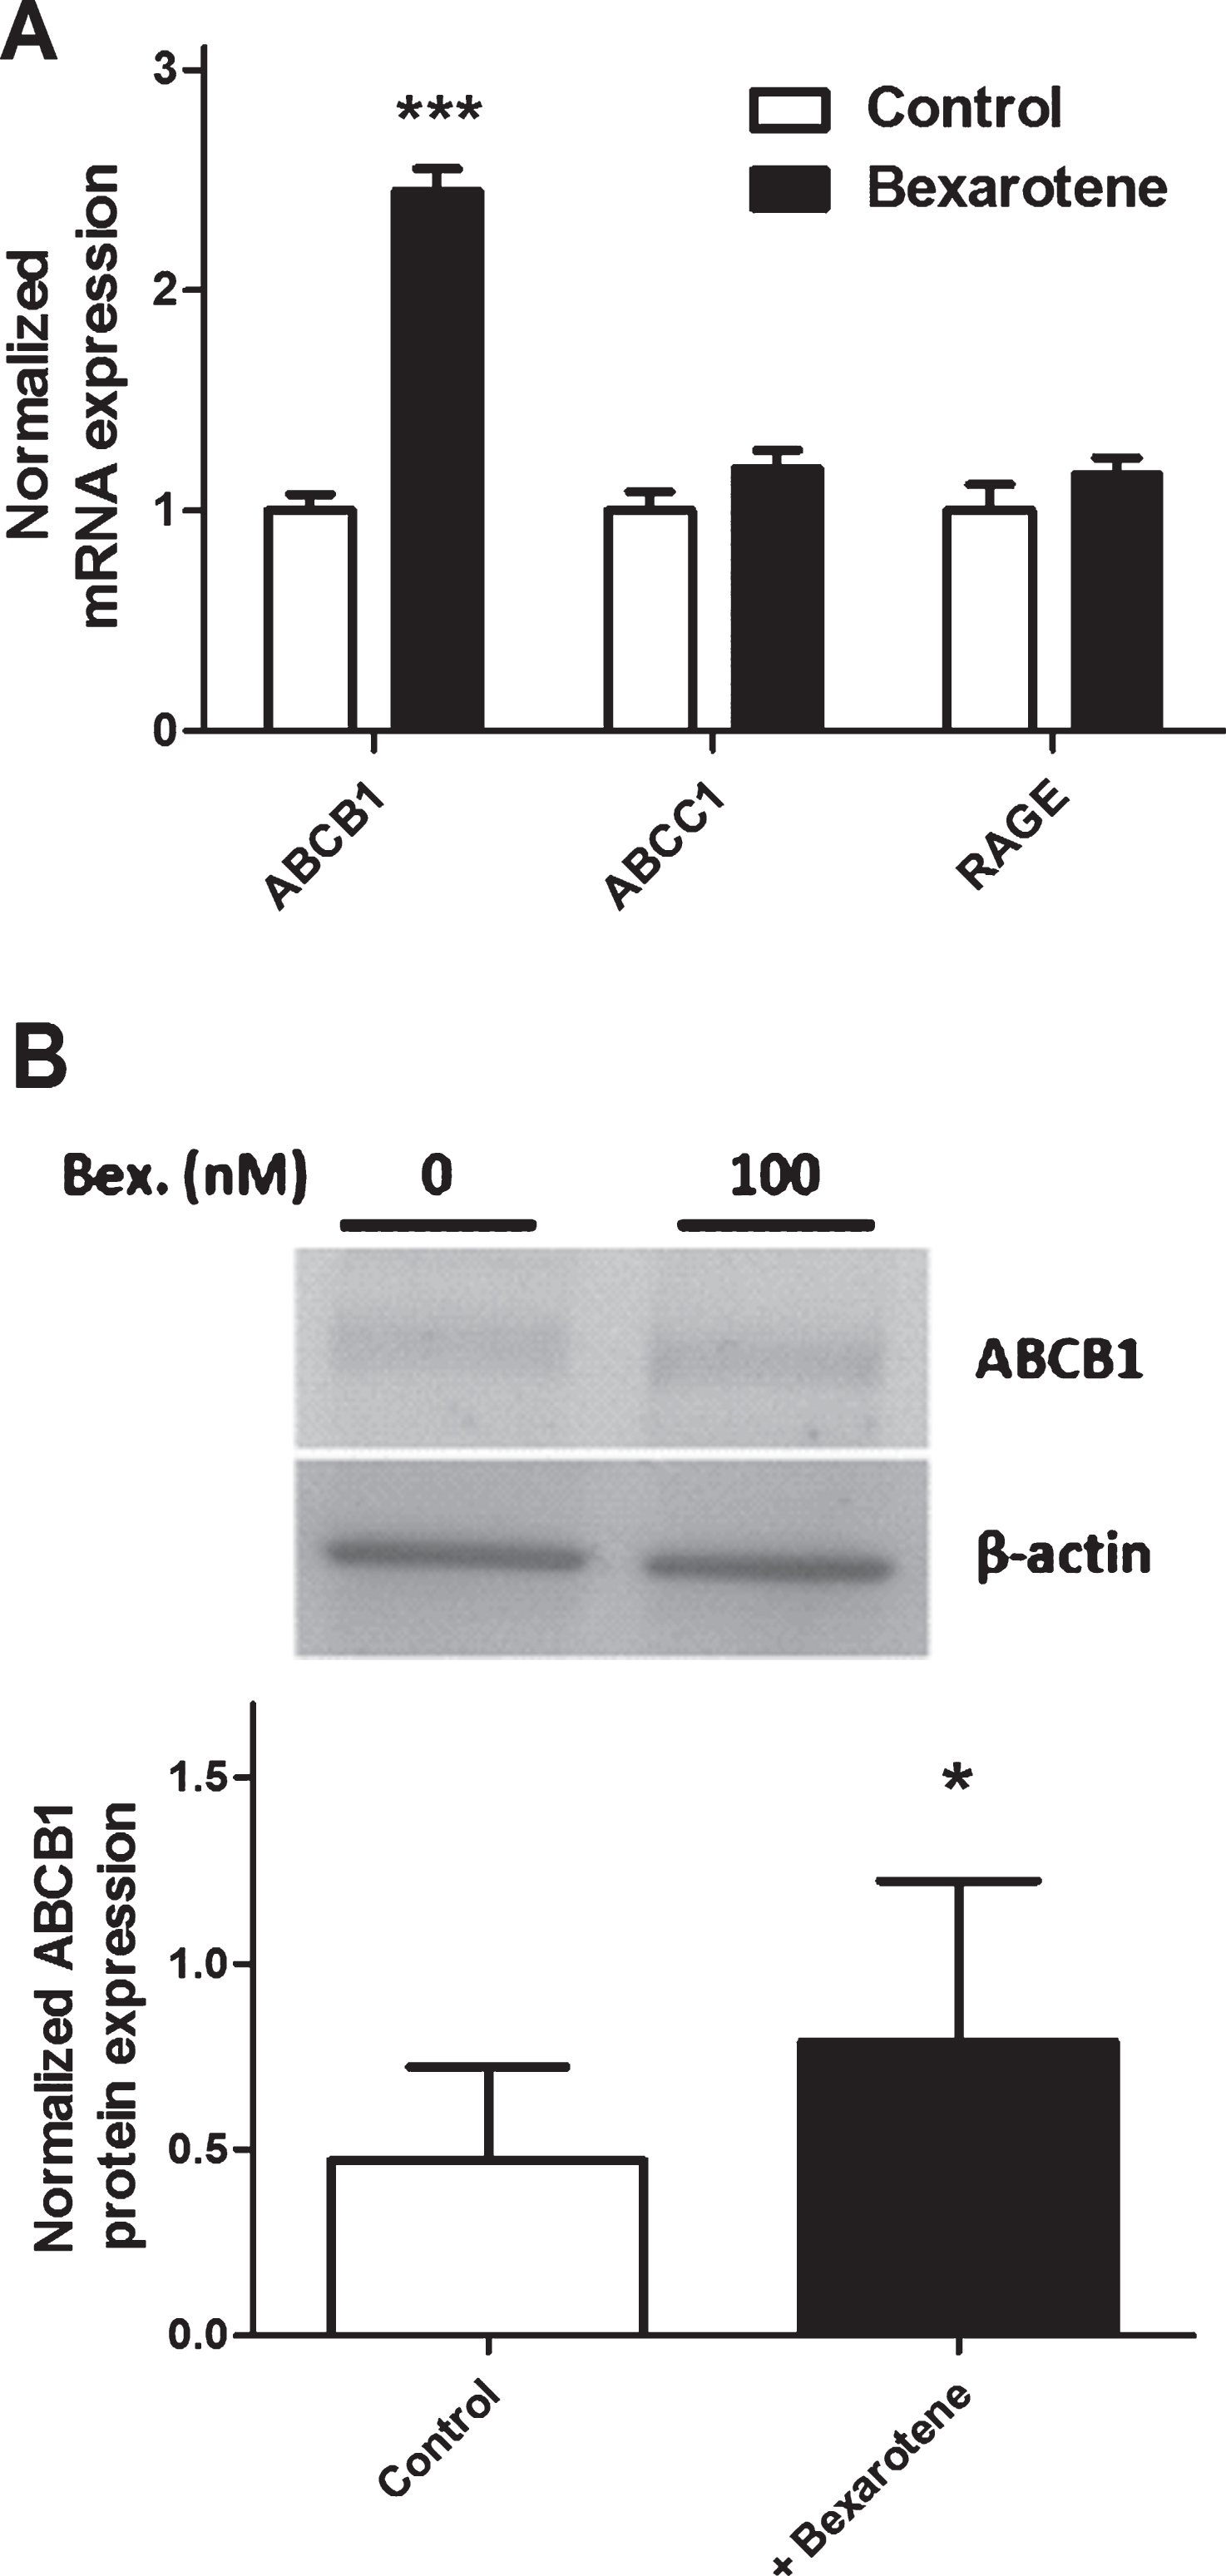 The effect of bexarotene (100 nM) on expression of transporters involved in Aβ peptide influx across BLECs. In (A), cells were pretreated for 24 h with DMSO (control) or bexarotene (100 nM). ABCB1, RAGE, andABCC1 were analyzed using RT-qPCR assays and the primers listed in Table 1. Each bar corresponds to the mean±SEM of mRNA expression, normalized against RPLP0 and ACTB. In (B), protein expression of ABCB1 was assessed by immunoblotting after BLECs had been treated for 24 h with either DMSO or bexarotene (100 nM). Each bar corresponds to the mean±SD. Statistical analysis: a one-way ANOVA, followed by Dunnett’s test for multiple comparisons, where  *p <  0.05; ***p <  0.001, relative to a DMSO-treatedcontrol.